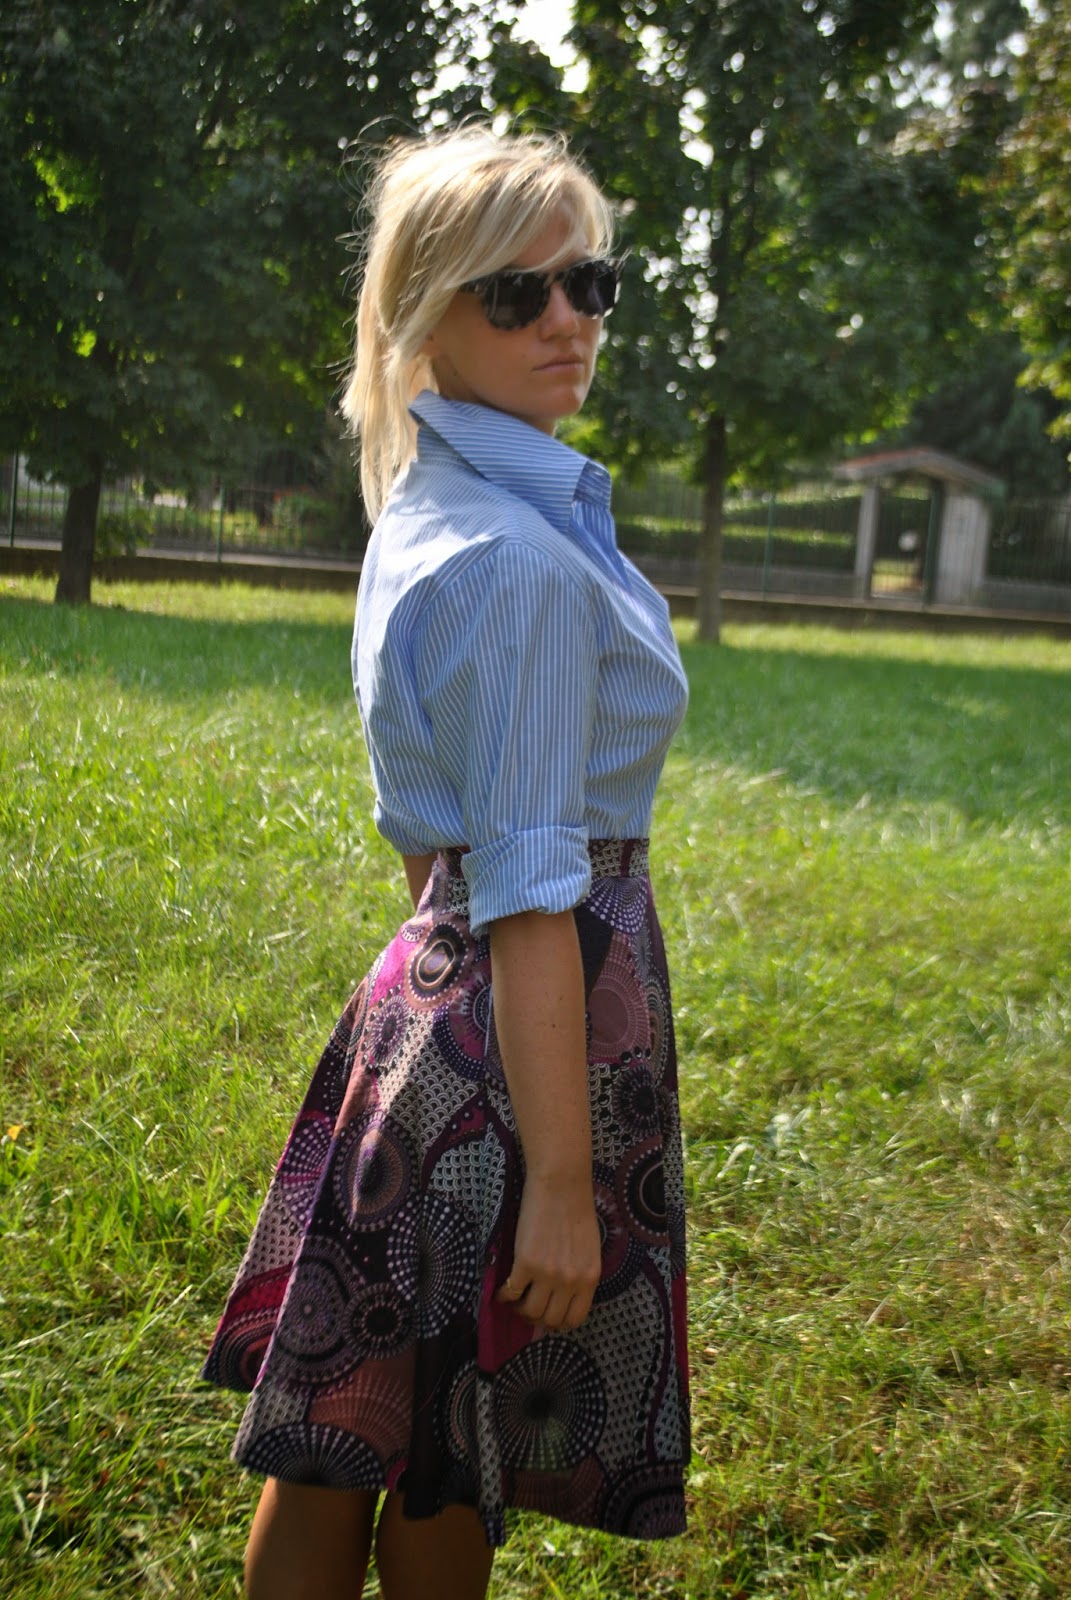 autumnal outfit recap october outfits fashion bloggers italy italian girl   outfit ottobre 2014 recap outfit ottobre 2014 outfit autunnali outfit camicia a righe outfit gonna a ruota abbinamenti gonna a ruota abbinamenti camicia a righe come abbinare la camicia a righe collana majique majique london jewels color block by felym mariafelicia magno fashion blog italiani fashion blogger italiane mariafelicia magno fashion blogger united colors of benetton occhiali da sole carrera 